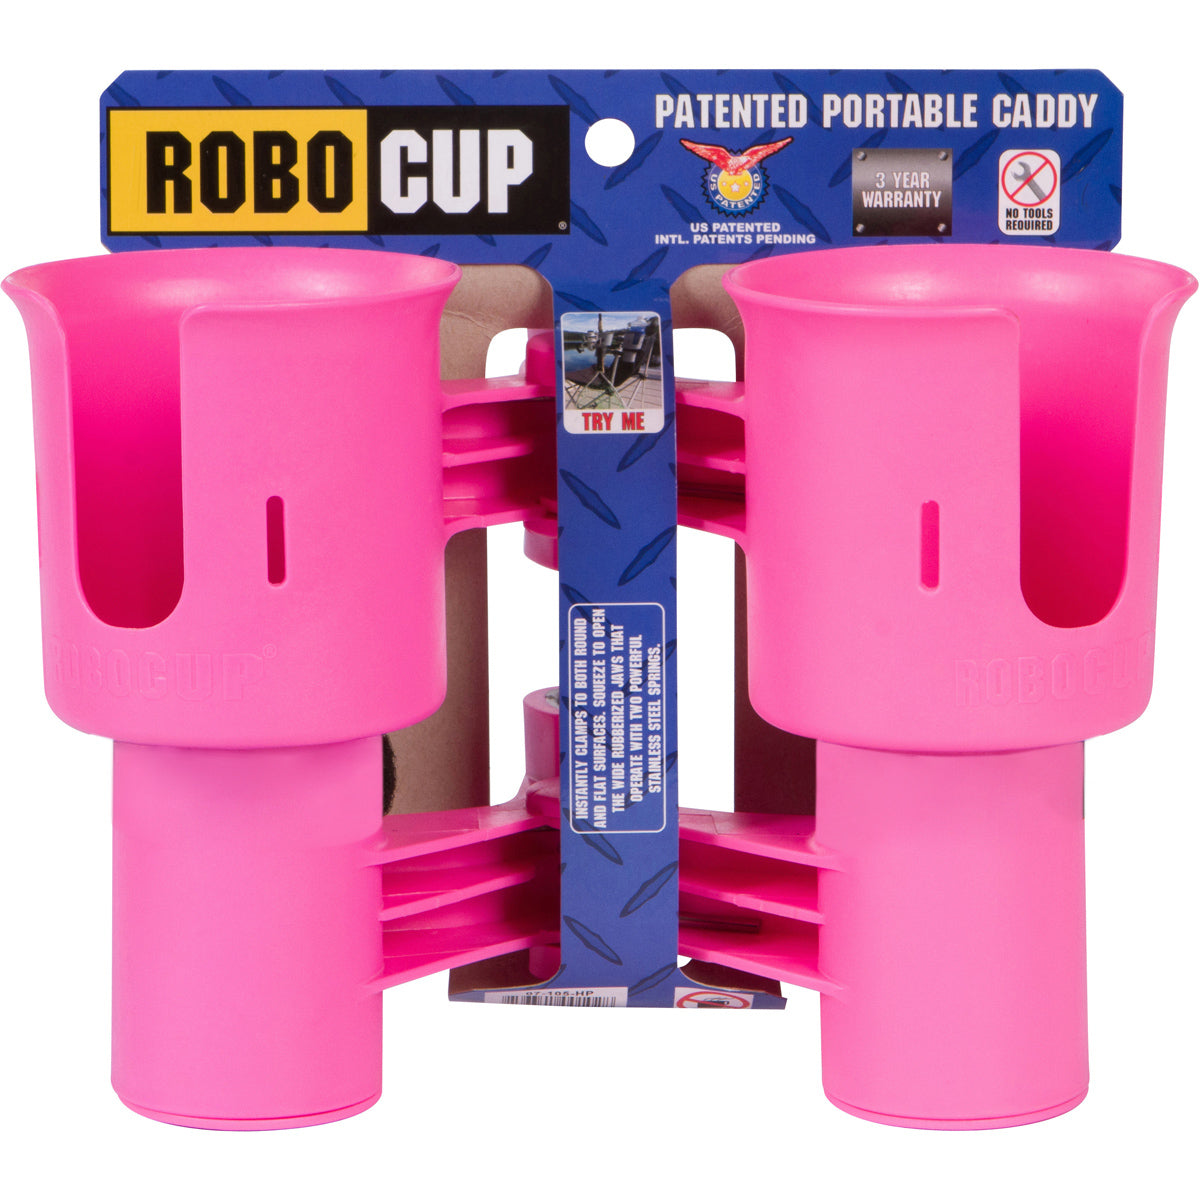 RoboCup GRAY, Patented Portable Caddy Tote, Cup Holder, Organizer,  Clampable Clip On Holder for Two Drinks, Cups, Bottles, Liquids, Rods, Drum  Sticks, Tools and more